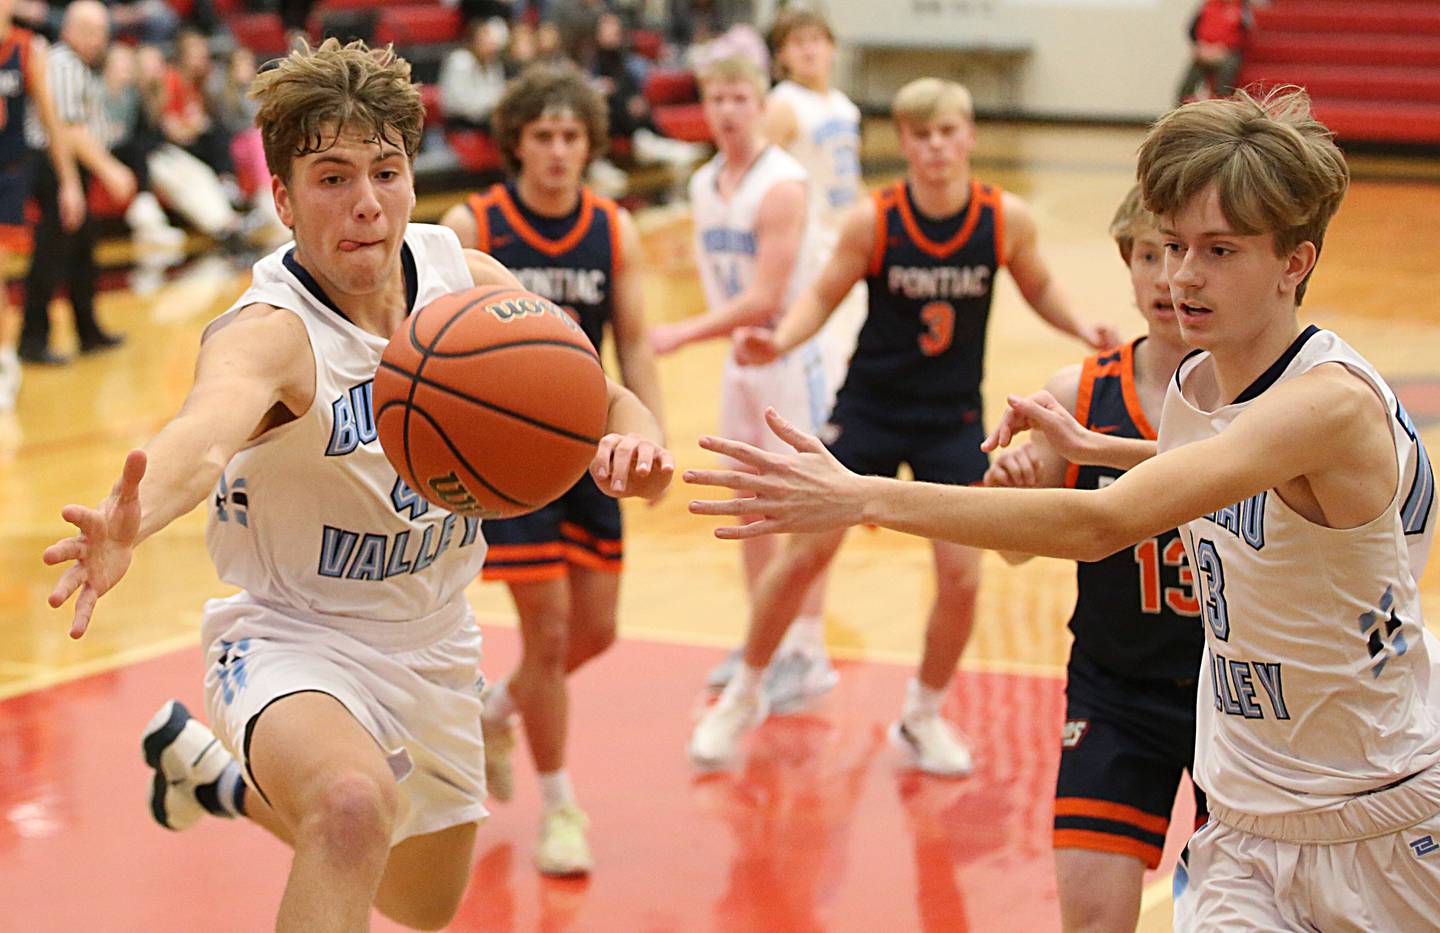 Bureau Valley's Landon Hulsing (4) and teammate Parker Stier (13) fail to recover the ball as it goes out of bounce during the Colmone Classic tournament on Monday, Dec. 5, 2022 at Hall High School in Spring Valley.